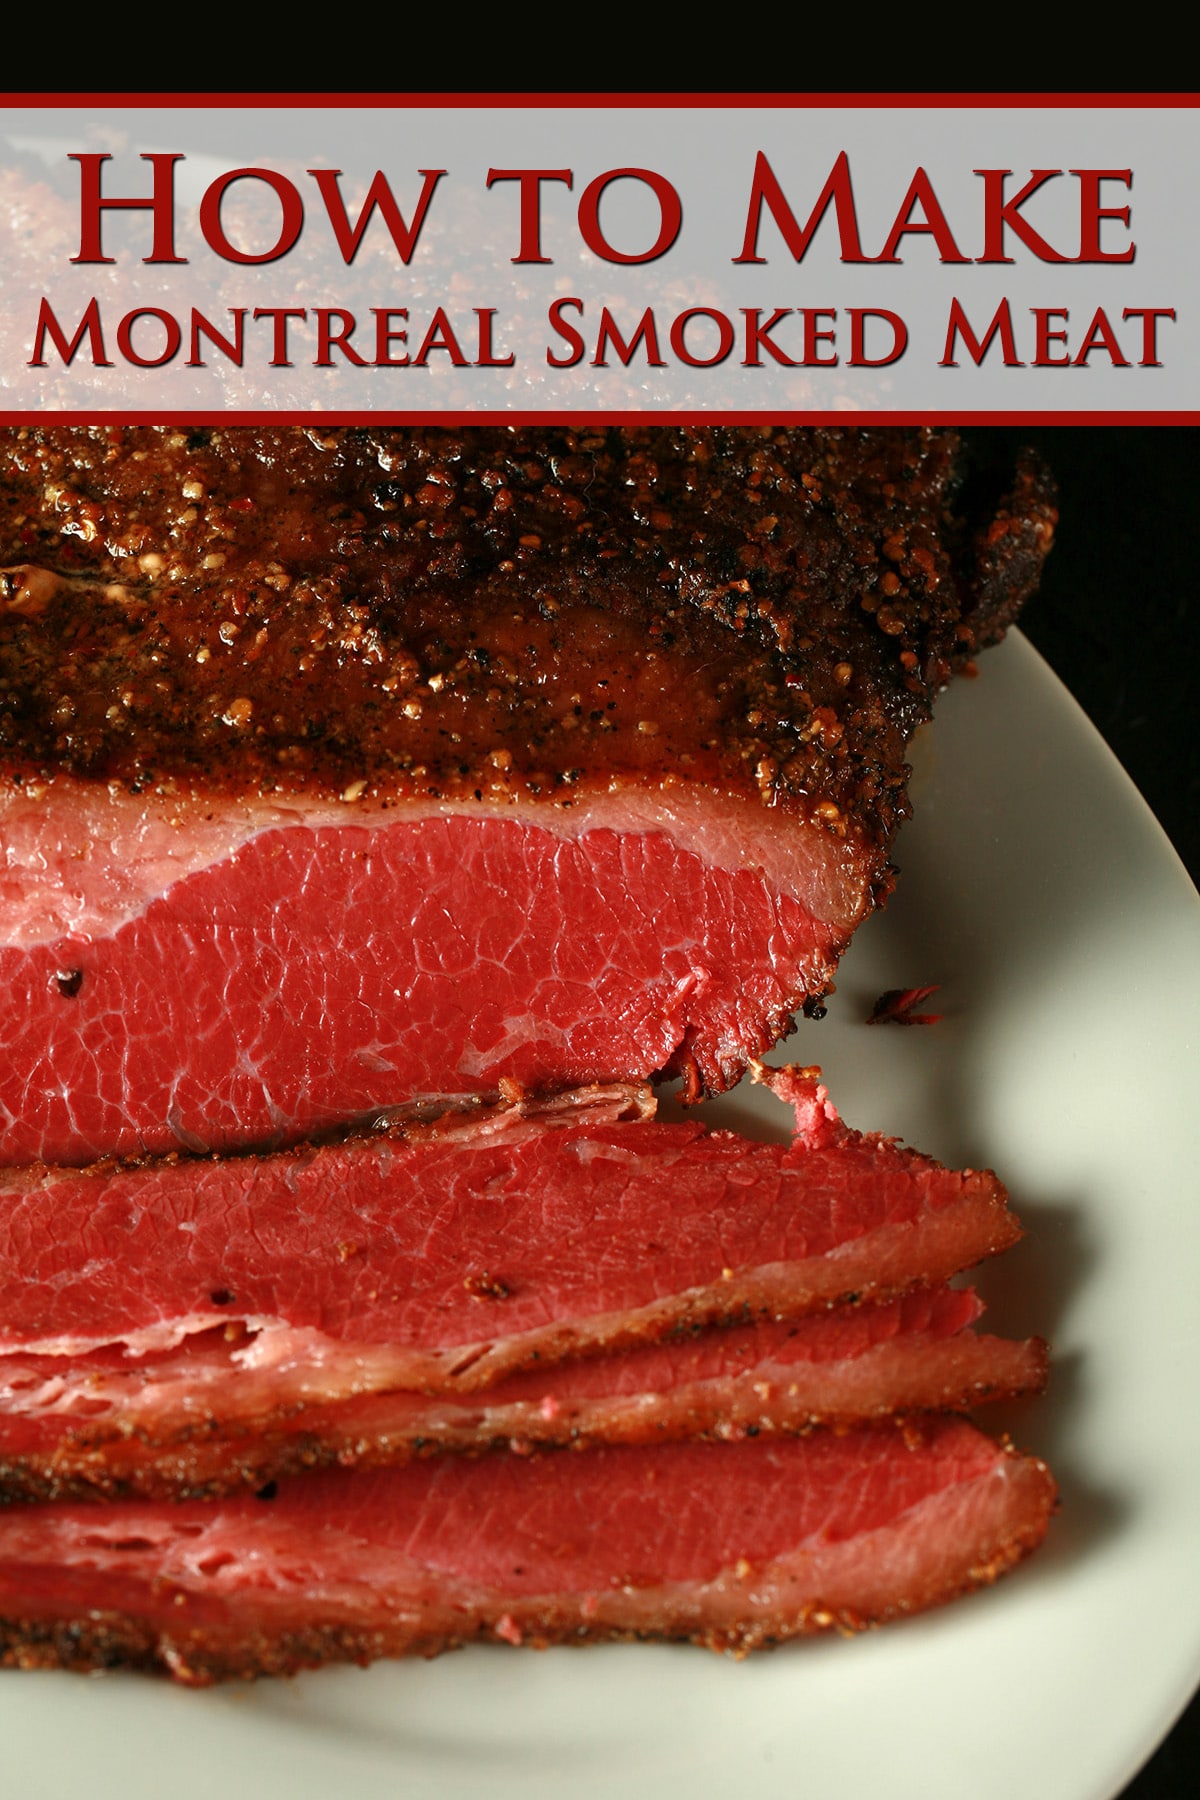 A large slab of Montreal Smoked Meat on a white plate. Severeal slices have been cut from the end in the foreground, revealing a bright red meat.